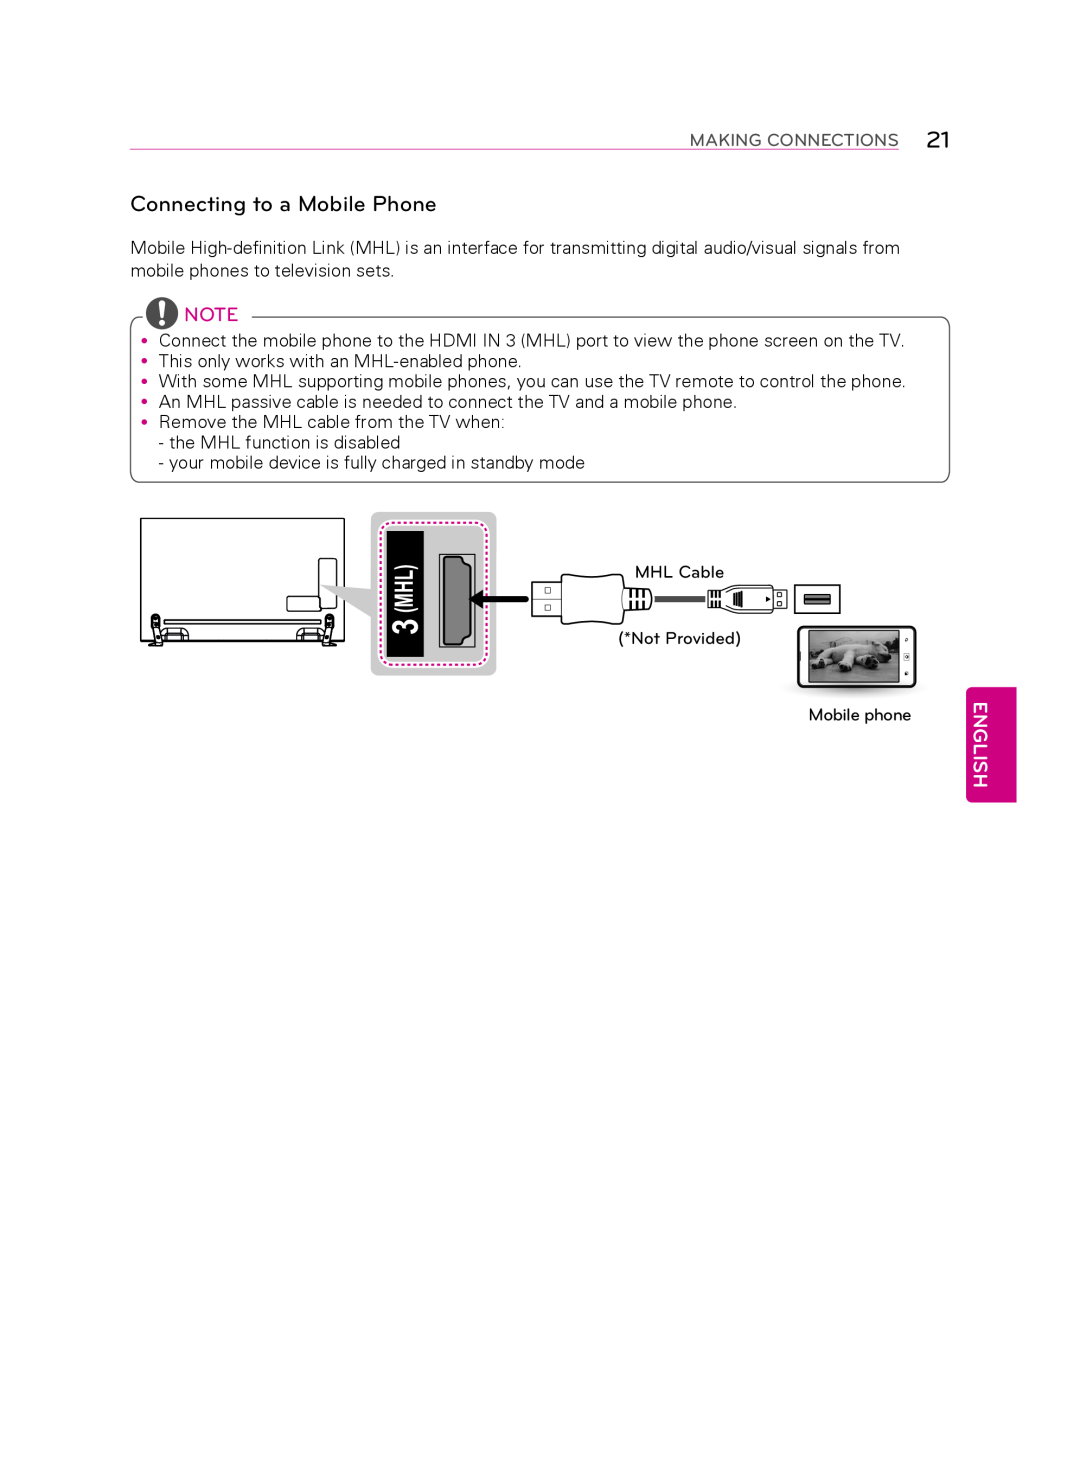 LG Electronics 55LA9650 owner manual Connecting to a mobile phone, English, Making Connections 